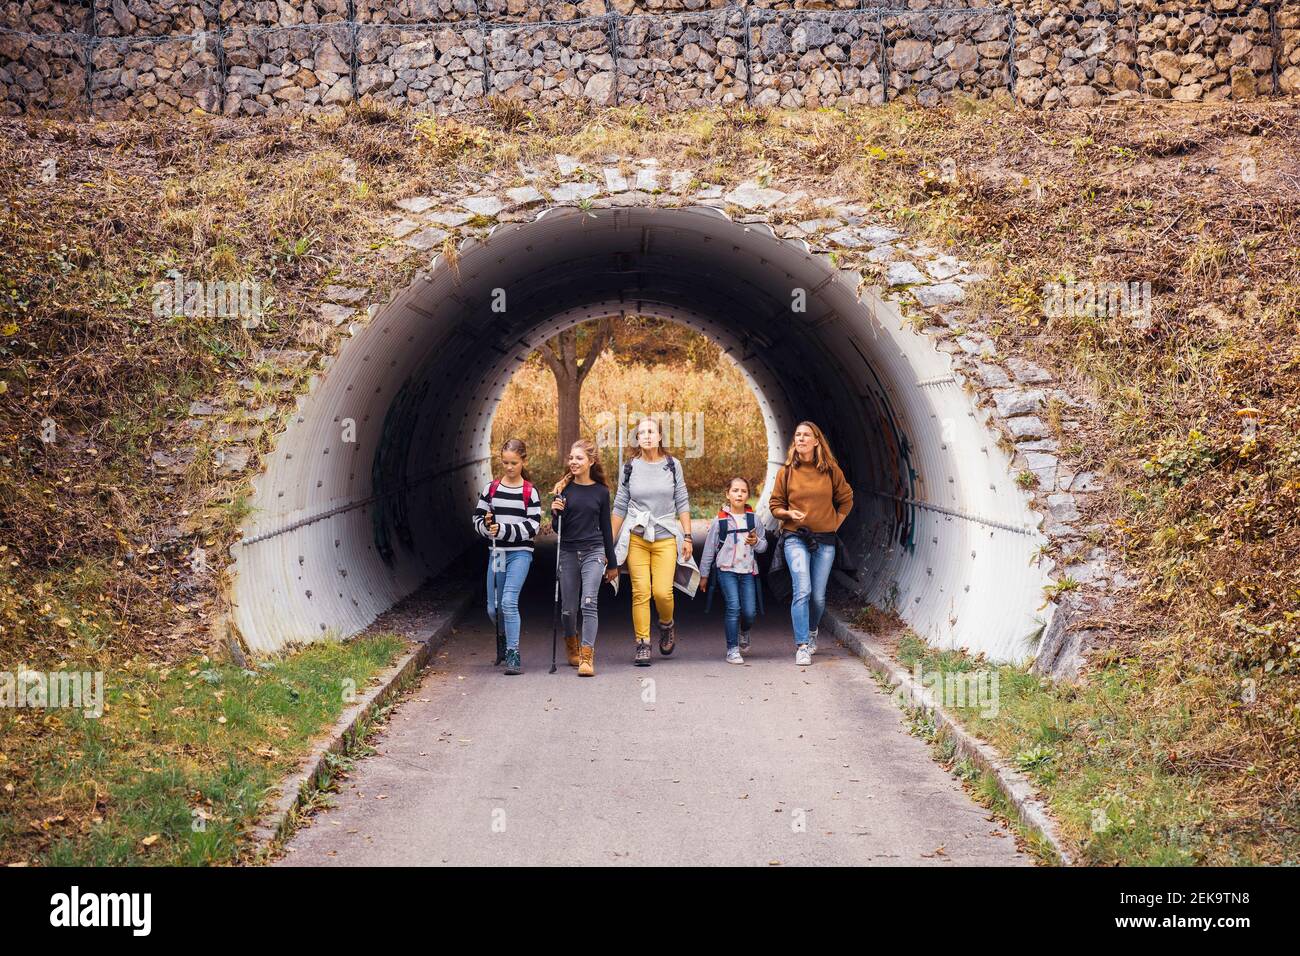 Explorers walking through underpass at countryside Stock Photo